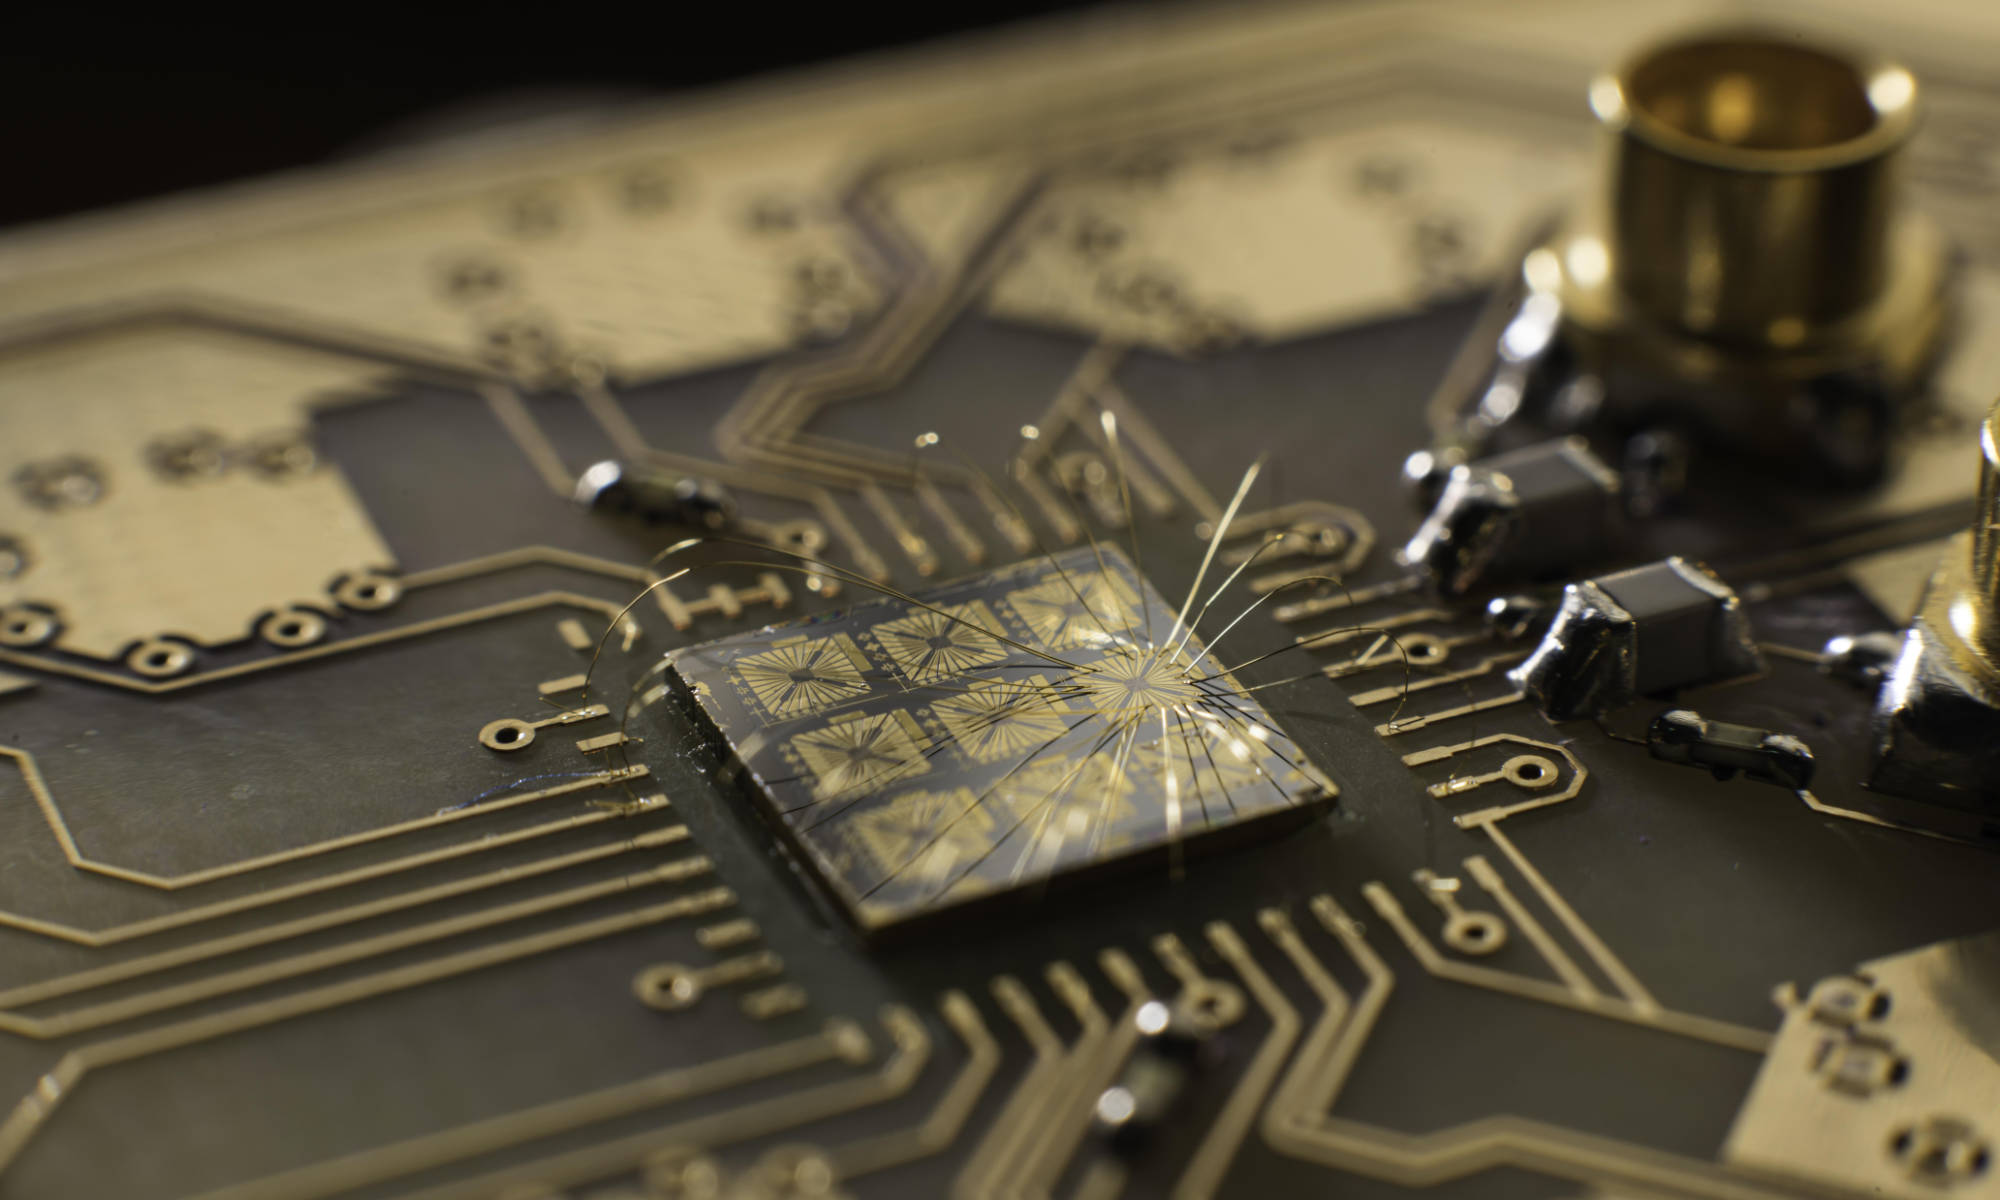 A quantum processor semiconductor chip connected to a circuit board.